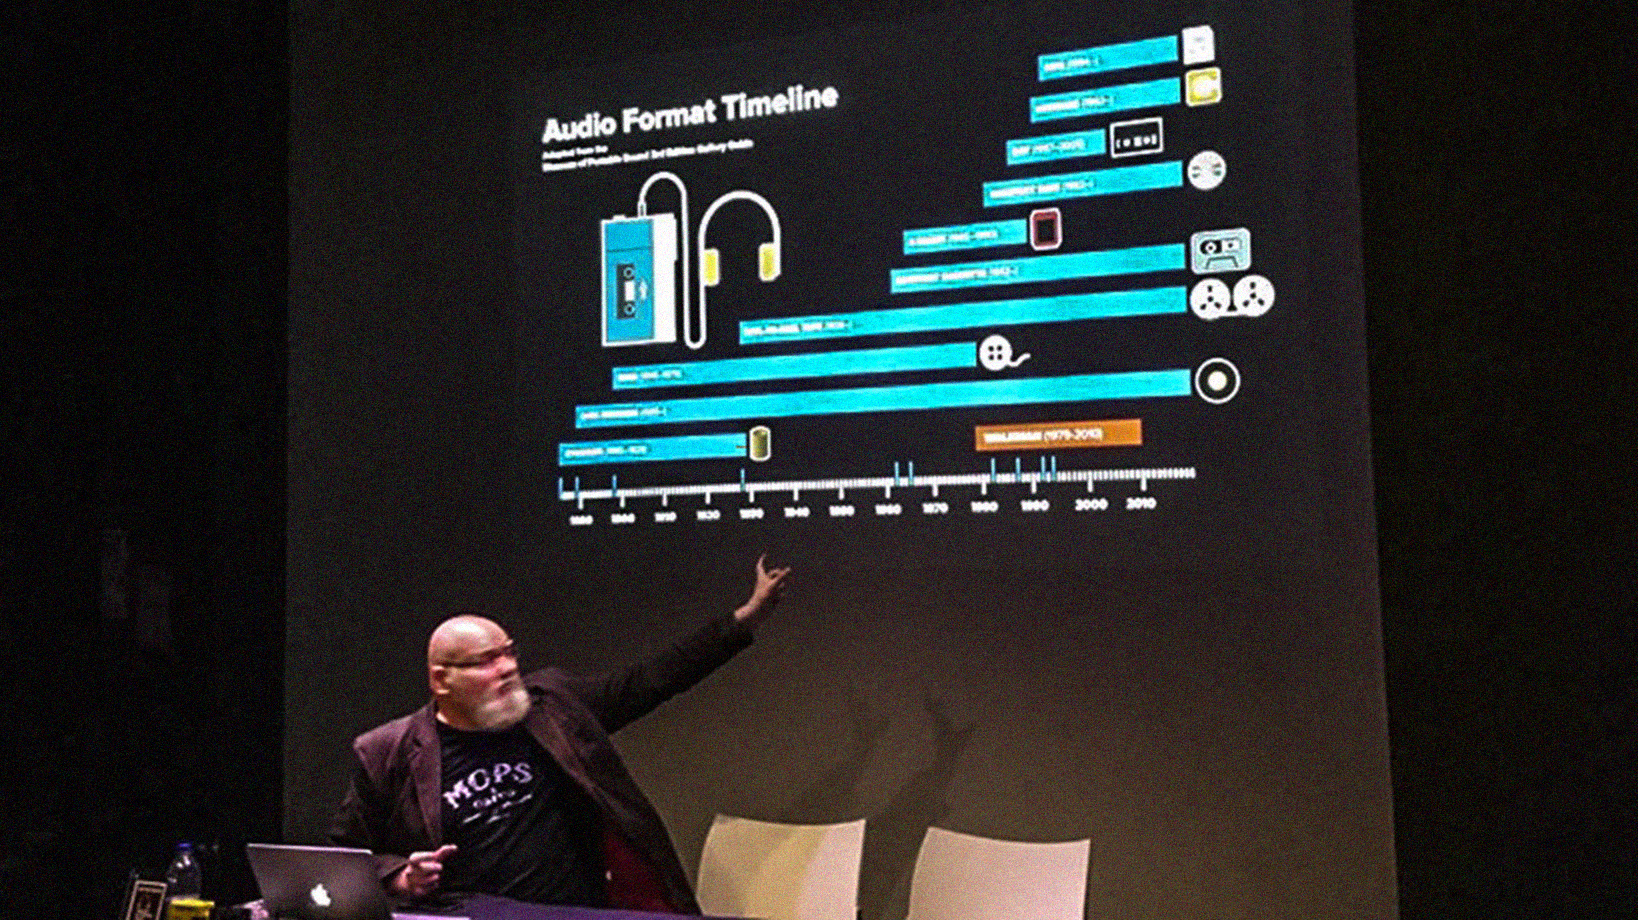 Museum of Portable Sound Director John Kannenberg discusses the Walkman's place on our Gallery Guide's Audio Format Timeline at our Grand Re-Re-Re-Opening event 40 Years of Portable Sound at the National Science and Media Museum, Bradford, UK, 1 July 2019.